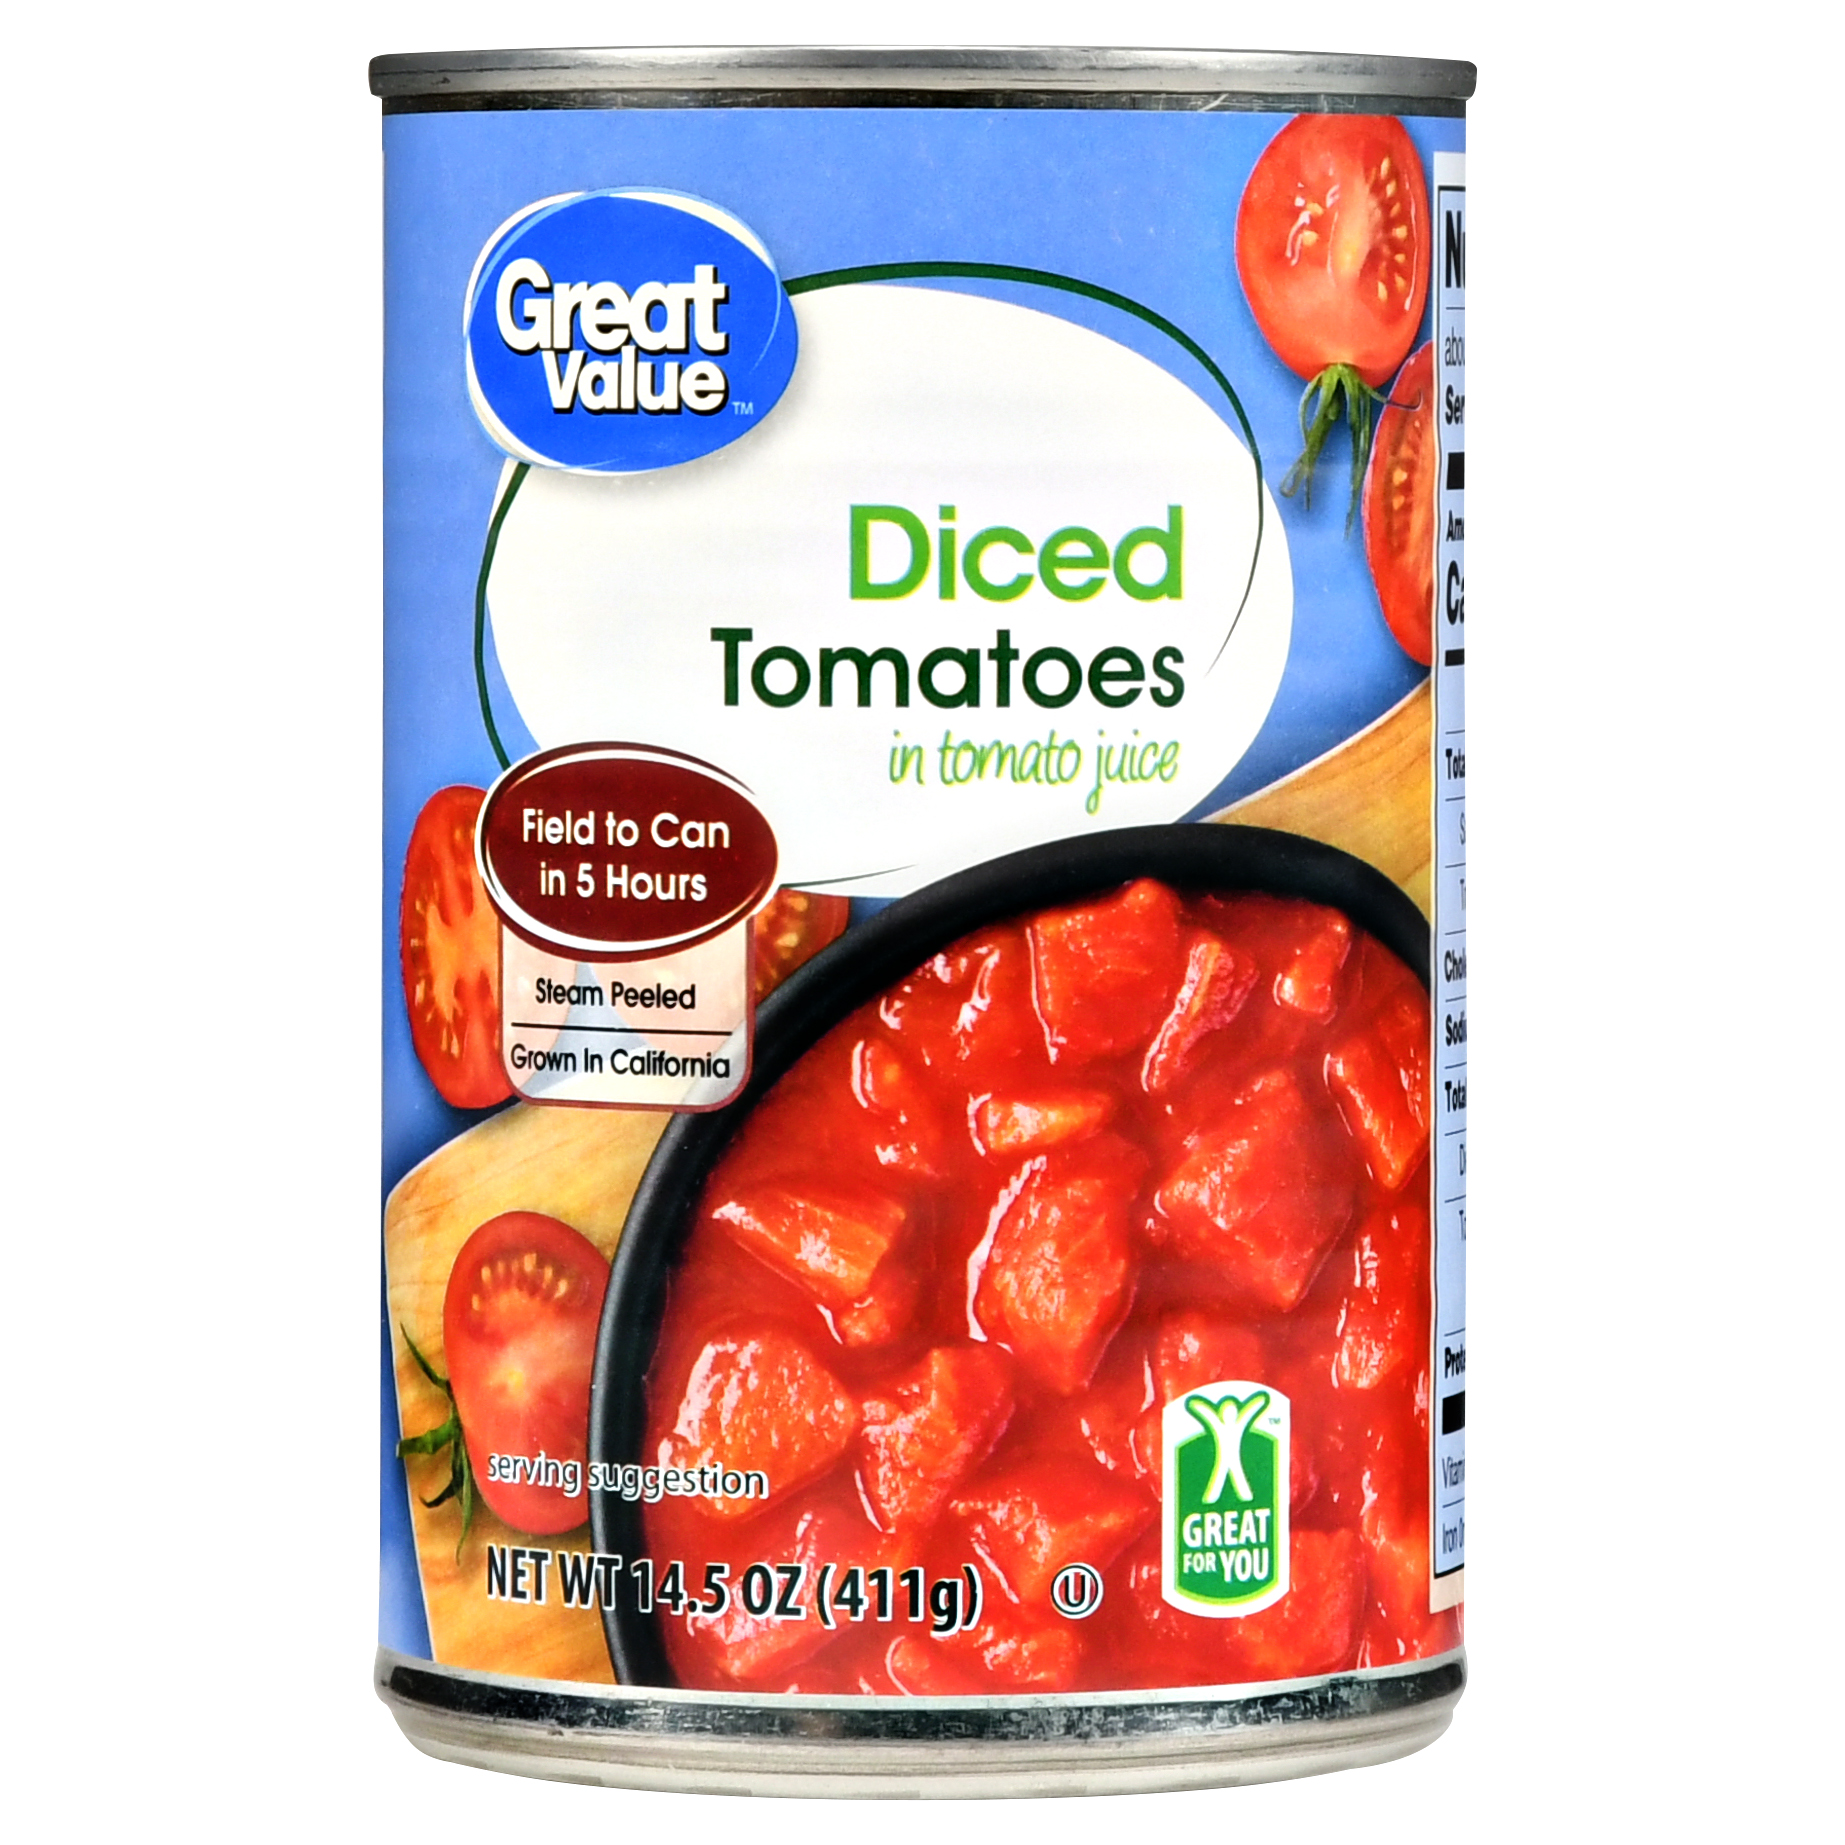 Great Value Diced Tomatoes in Tomato Juice, 14.5 Oz Image